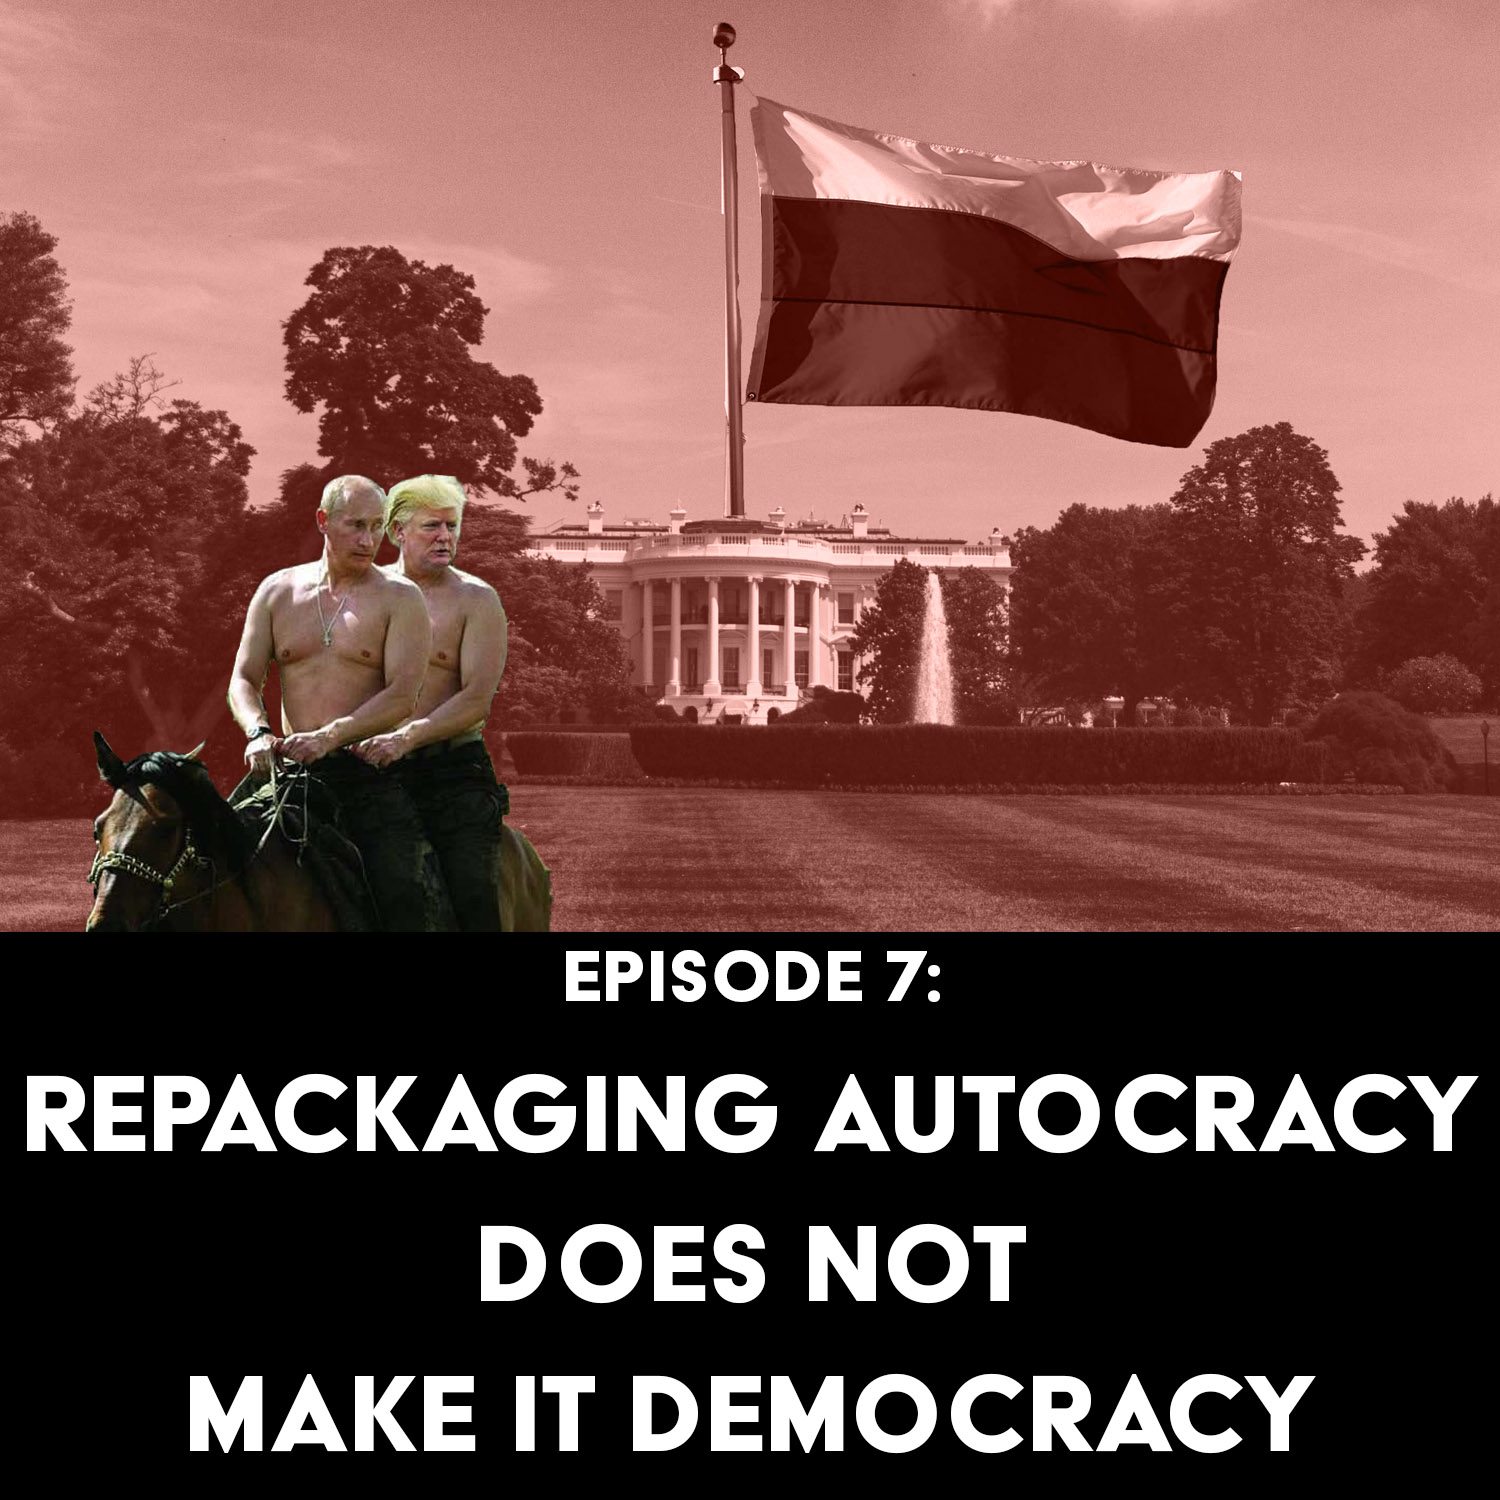 Episode 7: Repackaging Autocracy Does NOT Make it Democracy